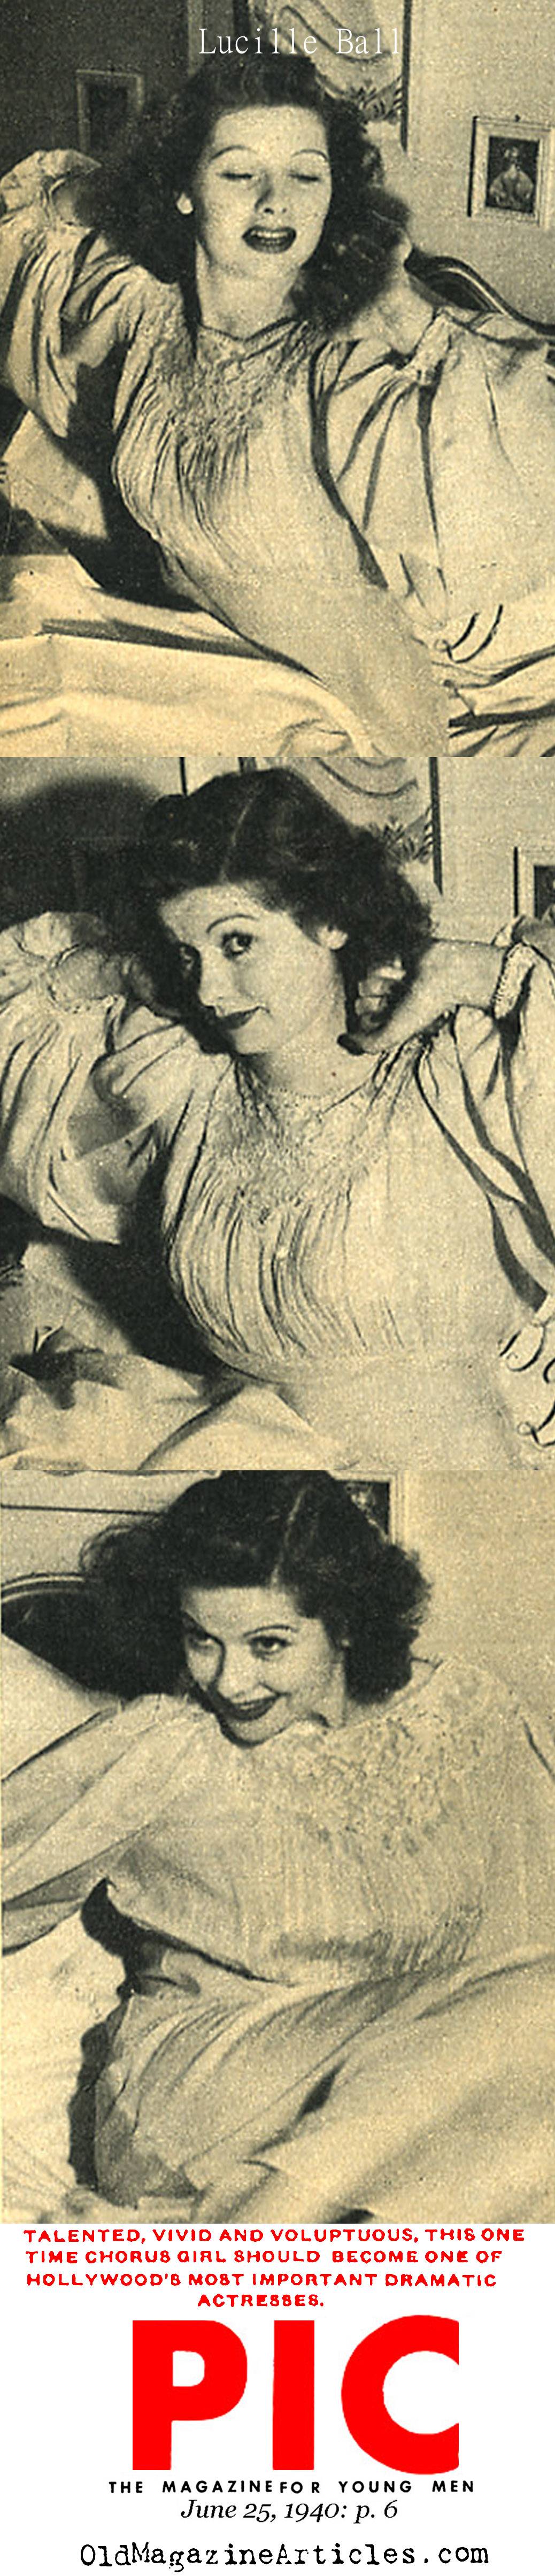 Lucille Ball Gets Noticed (Pic Magazine, 1940)